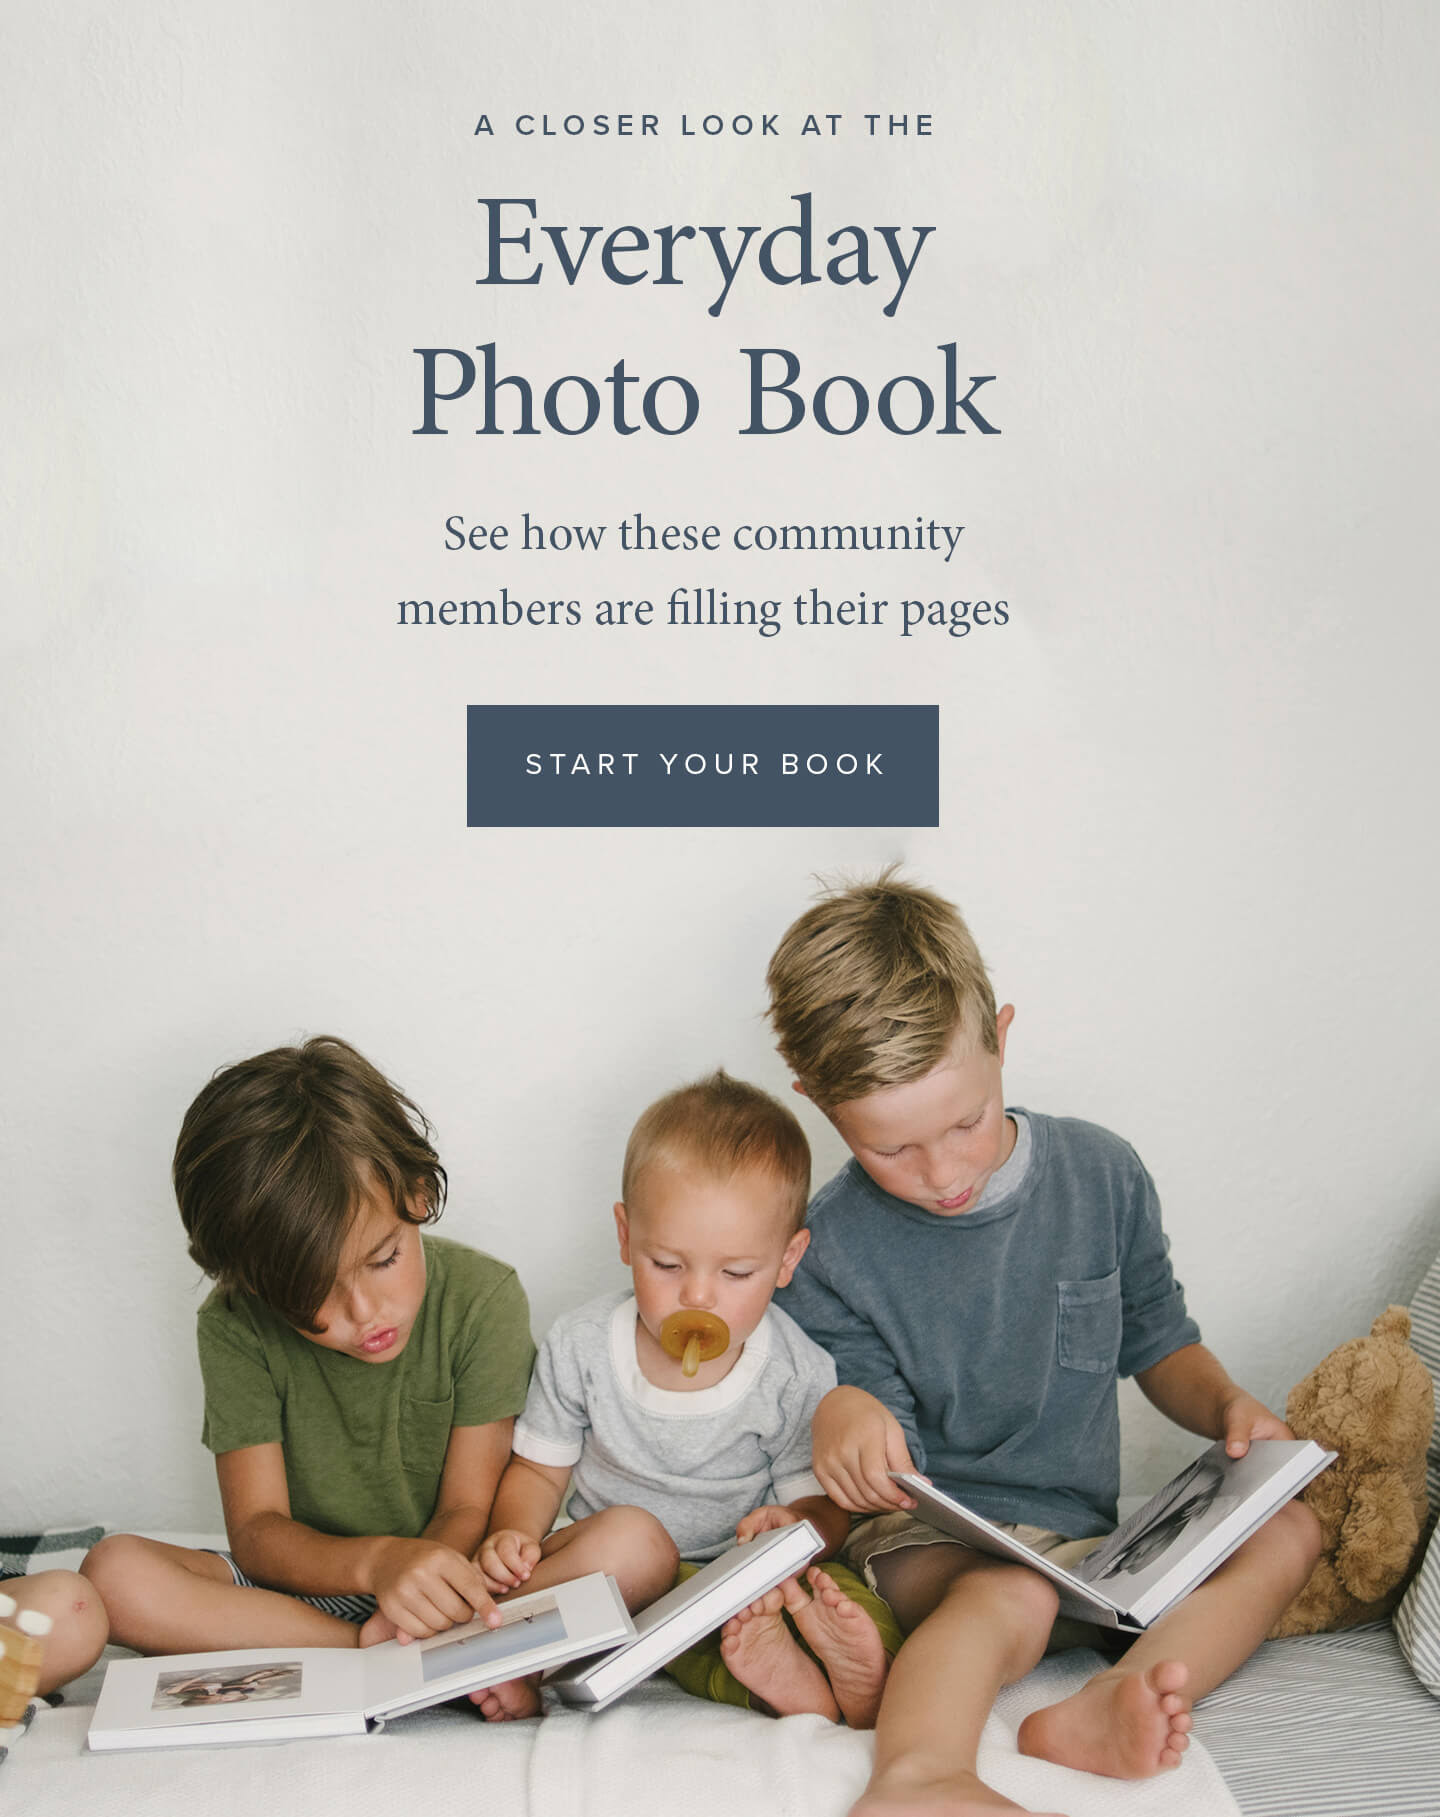 A closer look at the everday book - see how these communty members are filling their pages, start your book